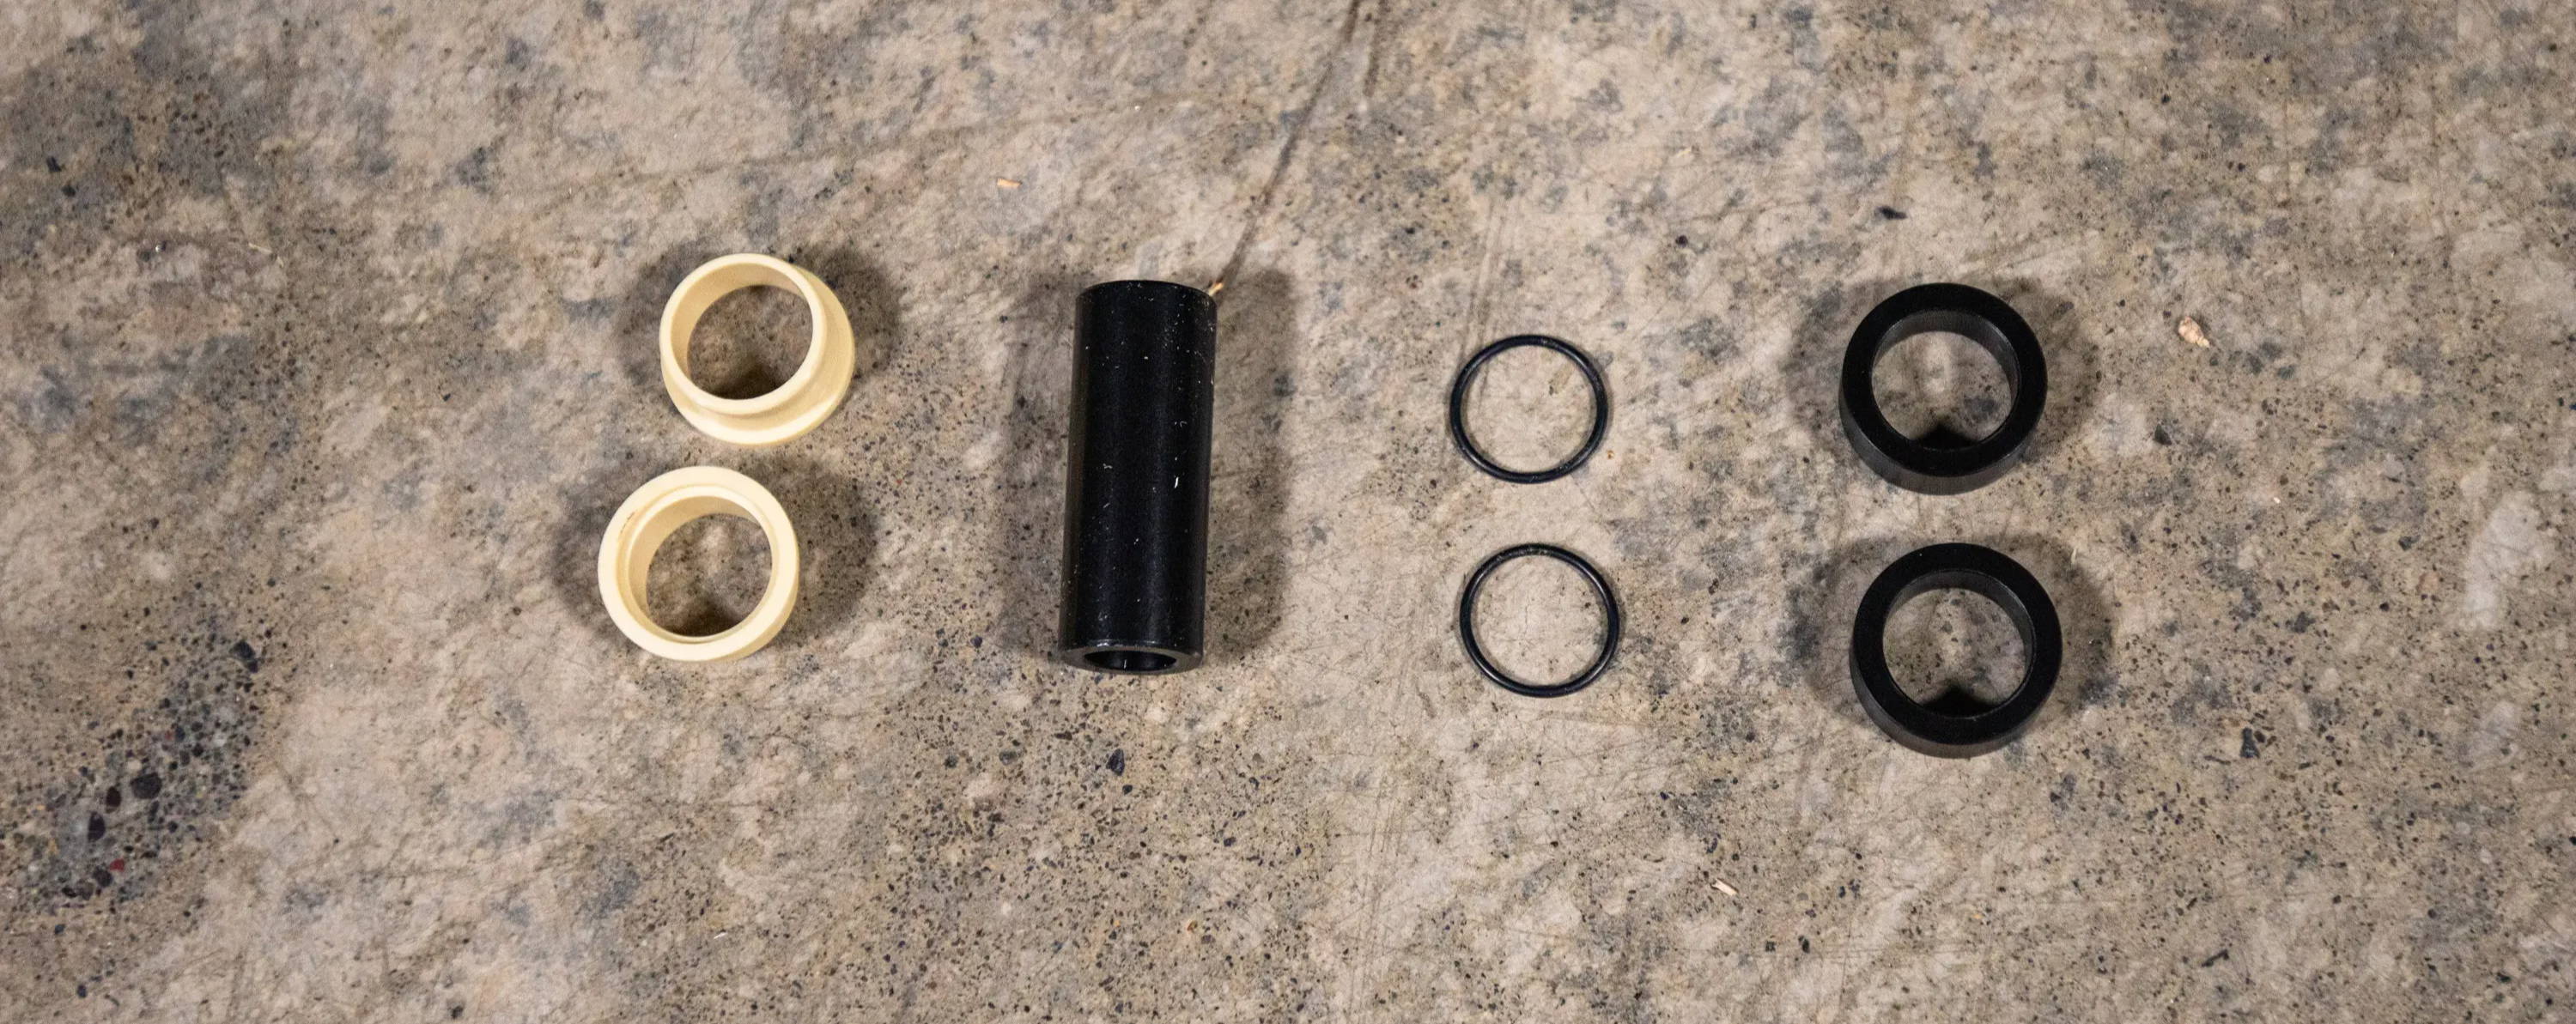 Mountain Bike Rear Shock Mounting hardware components layed out on the floor